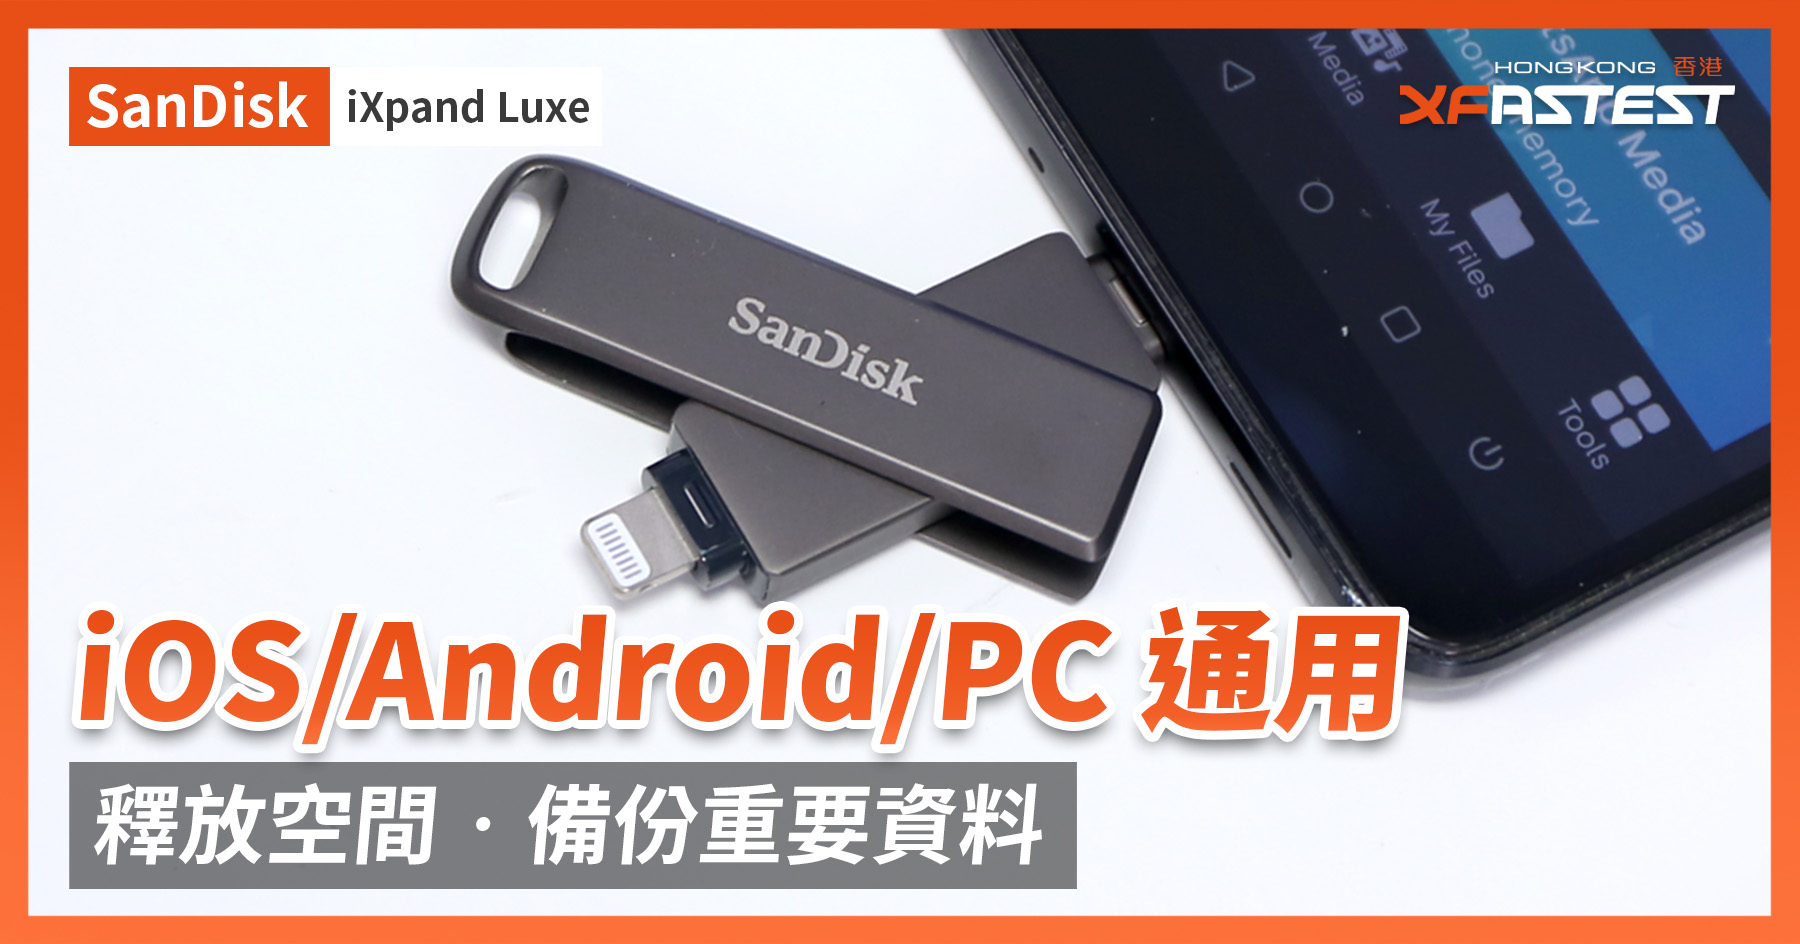 XF 開箱] iOS/Android/PC 即插即用釋放空間‧備份重要資料SanDisk iXpand Luxe - XFastest Hong  Kong